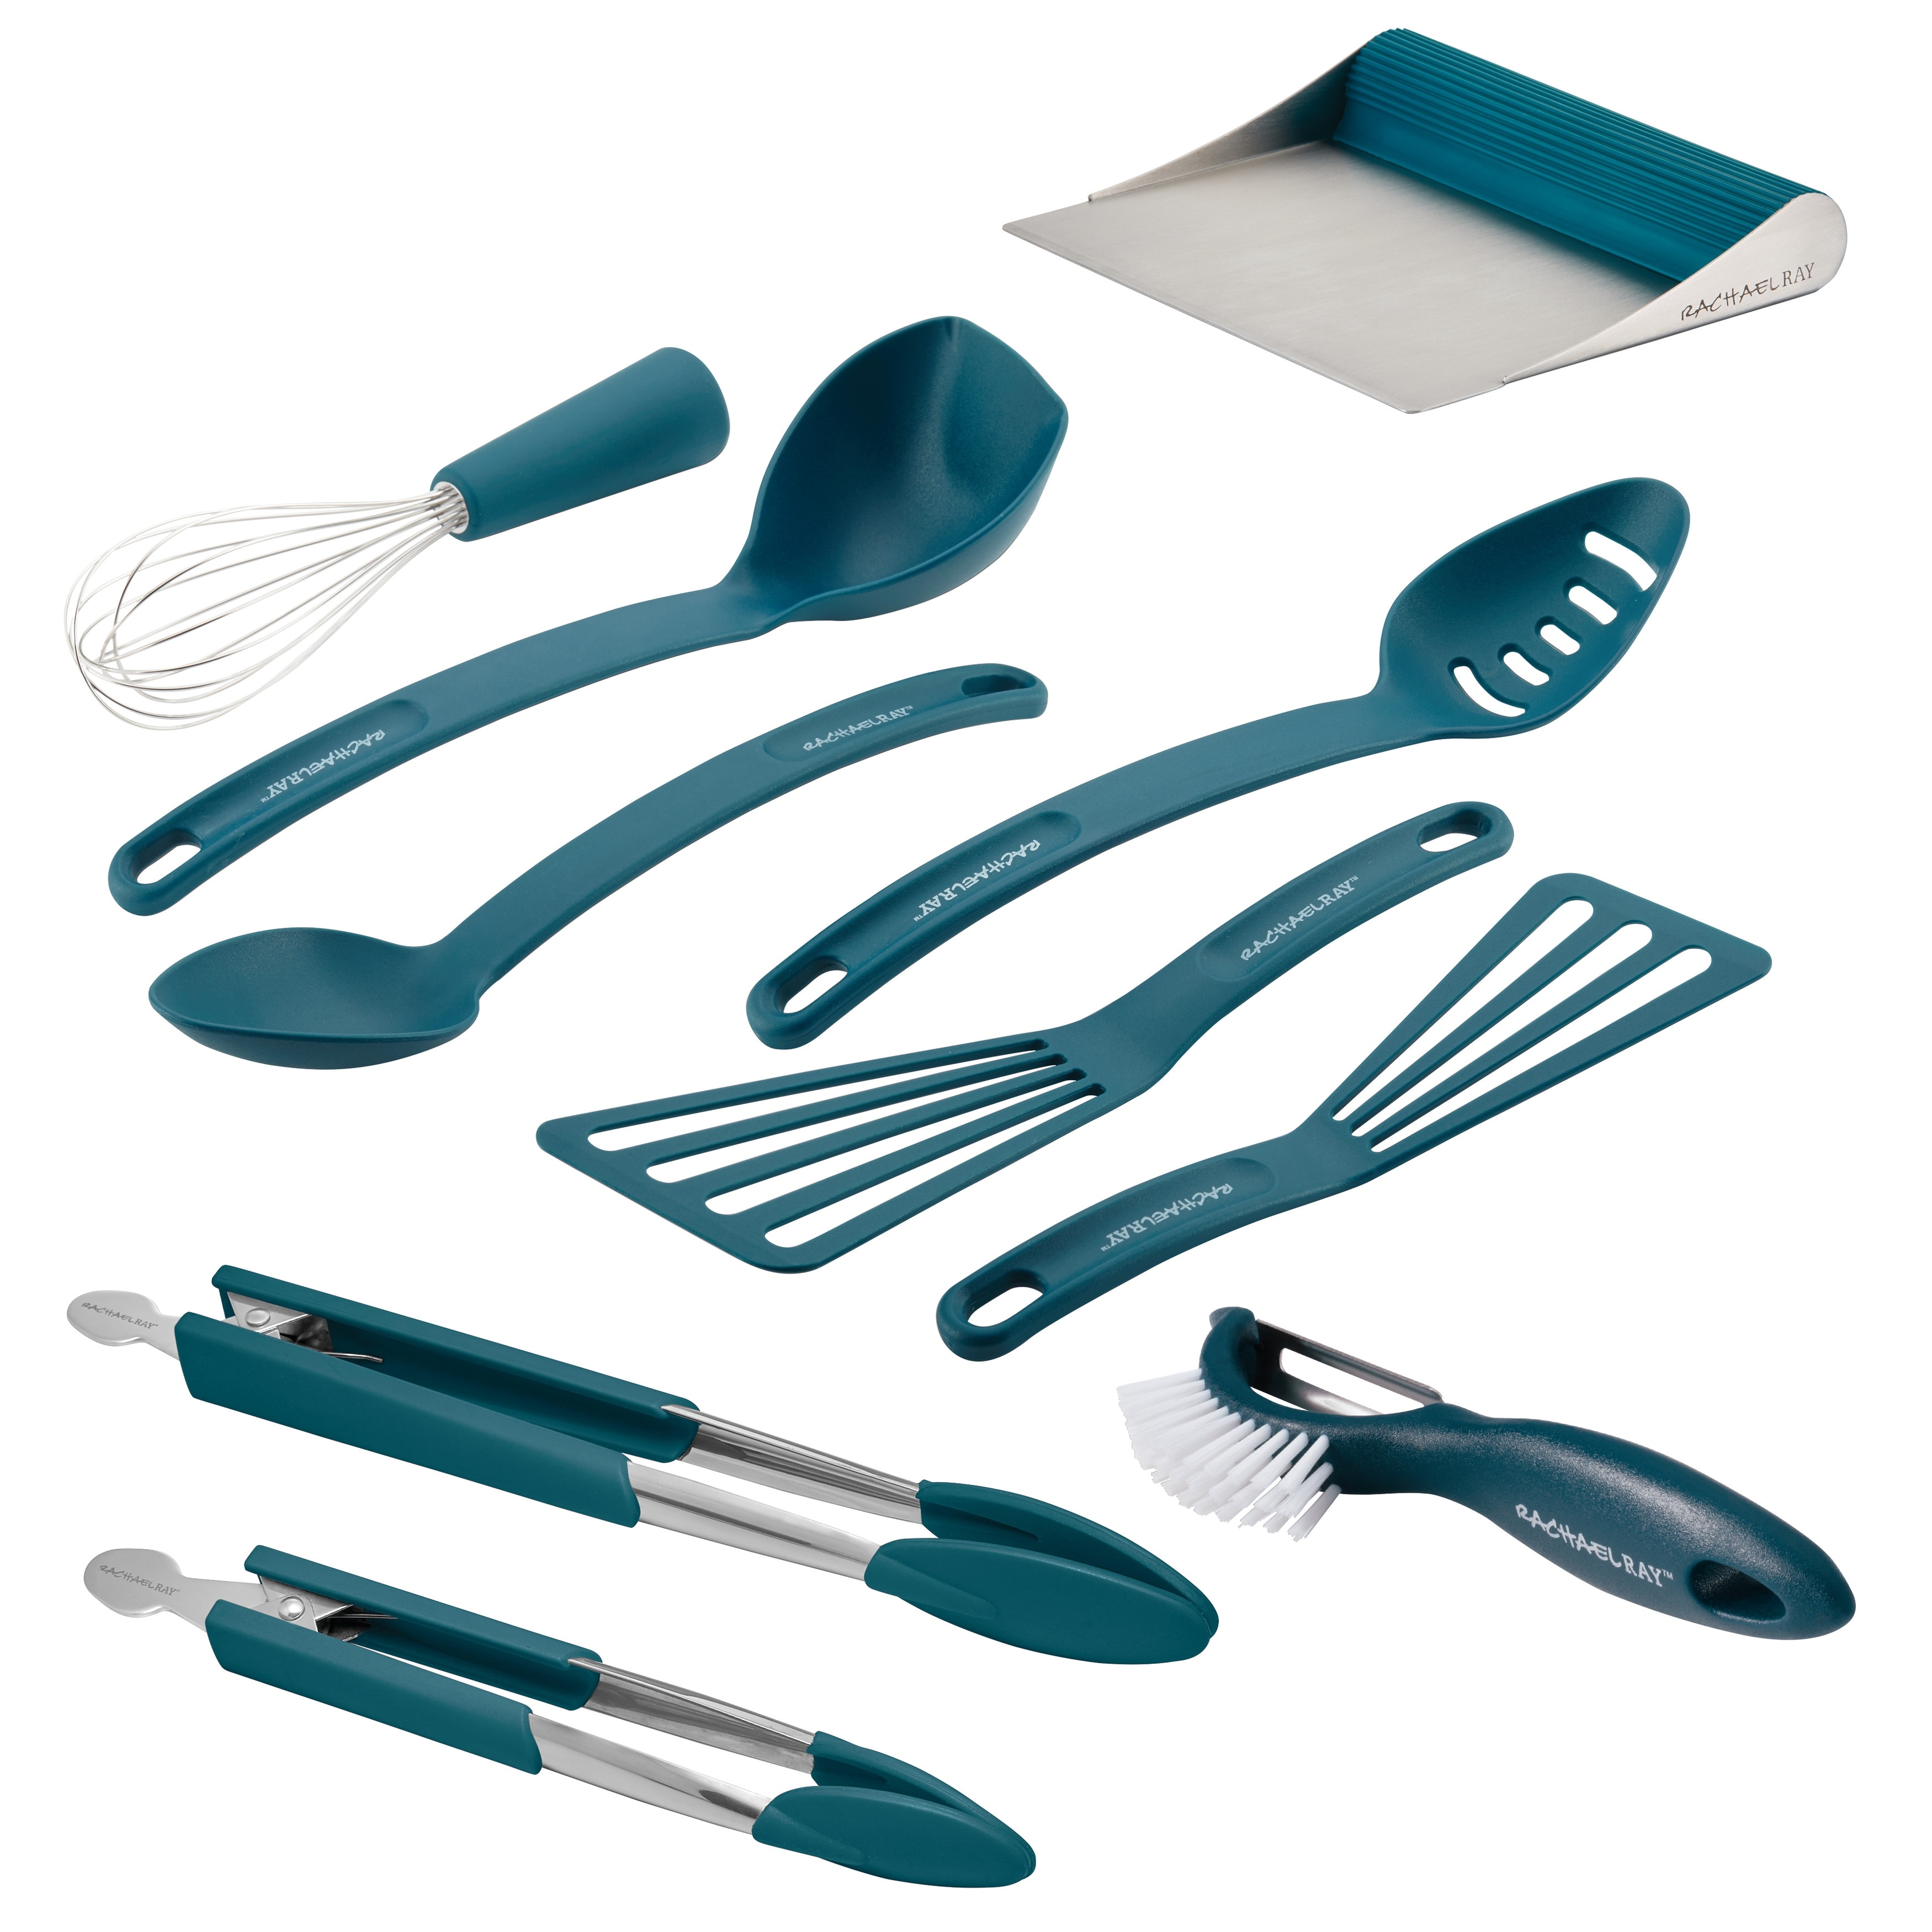 https://ak1.ostkcdn.com/images/products/is/images/direct/05b9ef413c4d84f809e133bc4f80a52140e40fd9/Rachael-Ray-Nylon-Nonstick-Tools-Set%2C-10-Piece.jpg